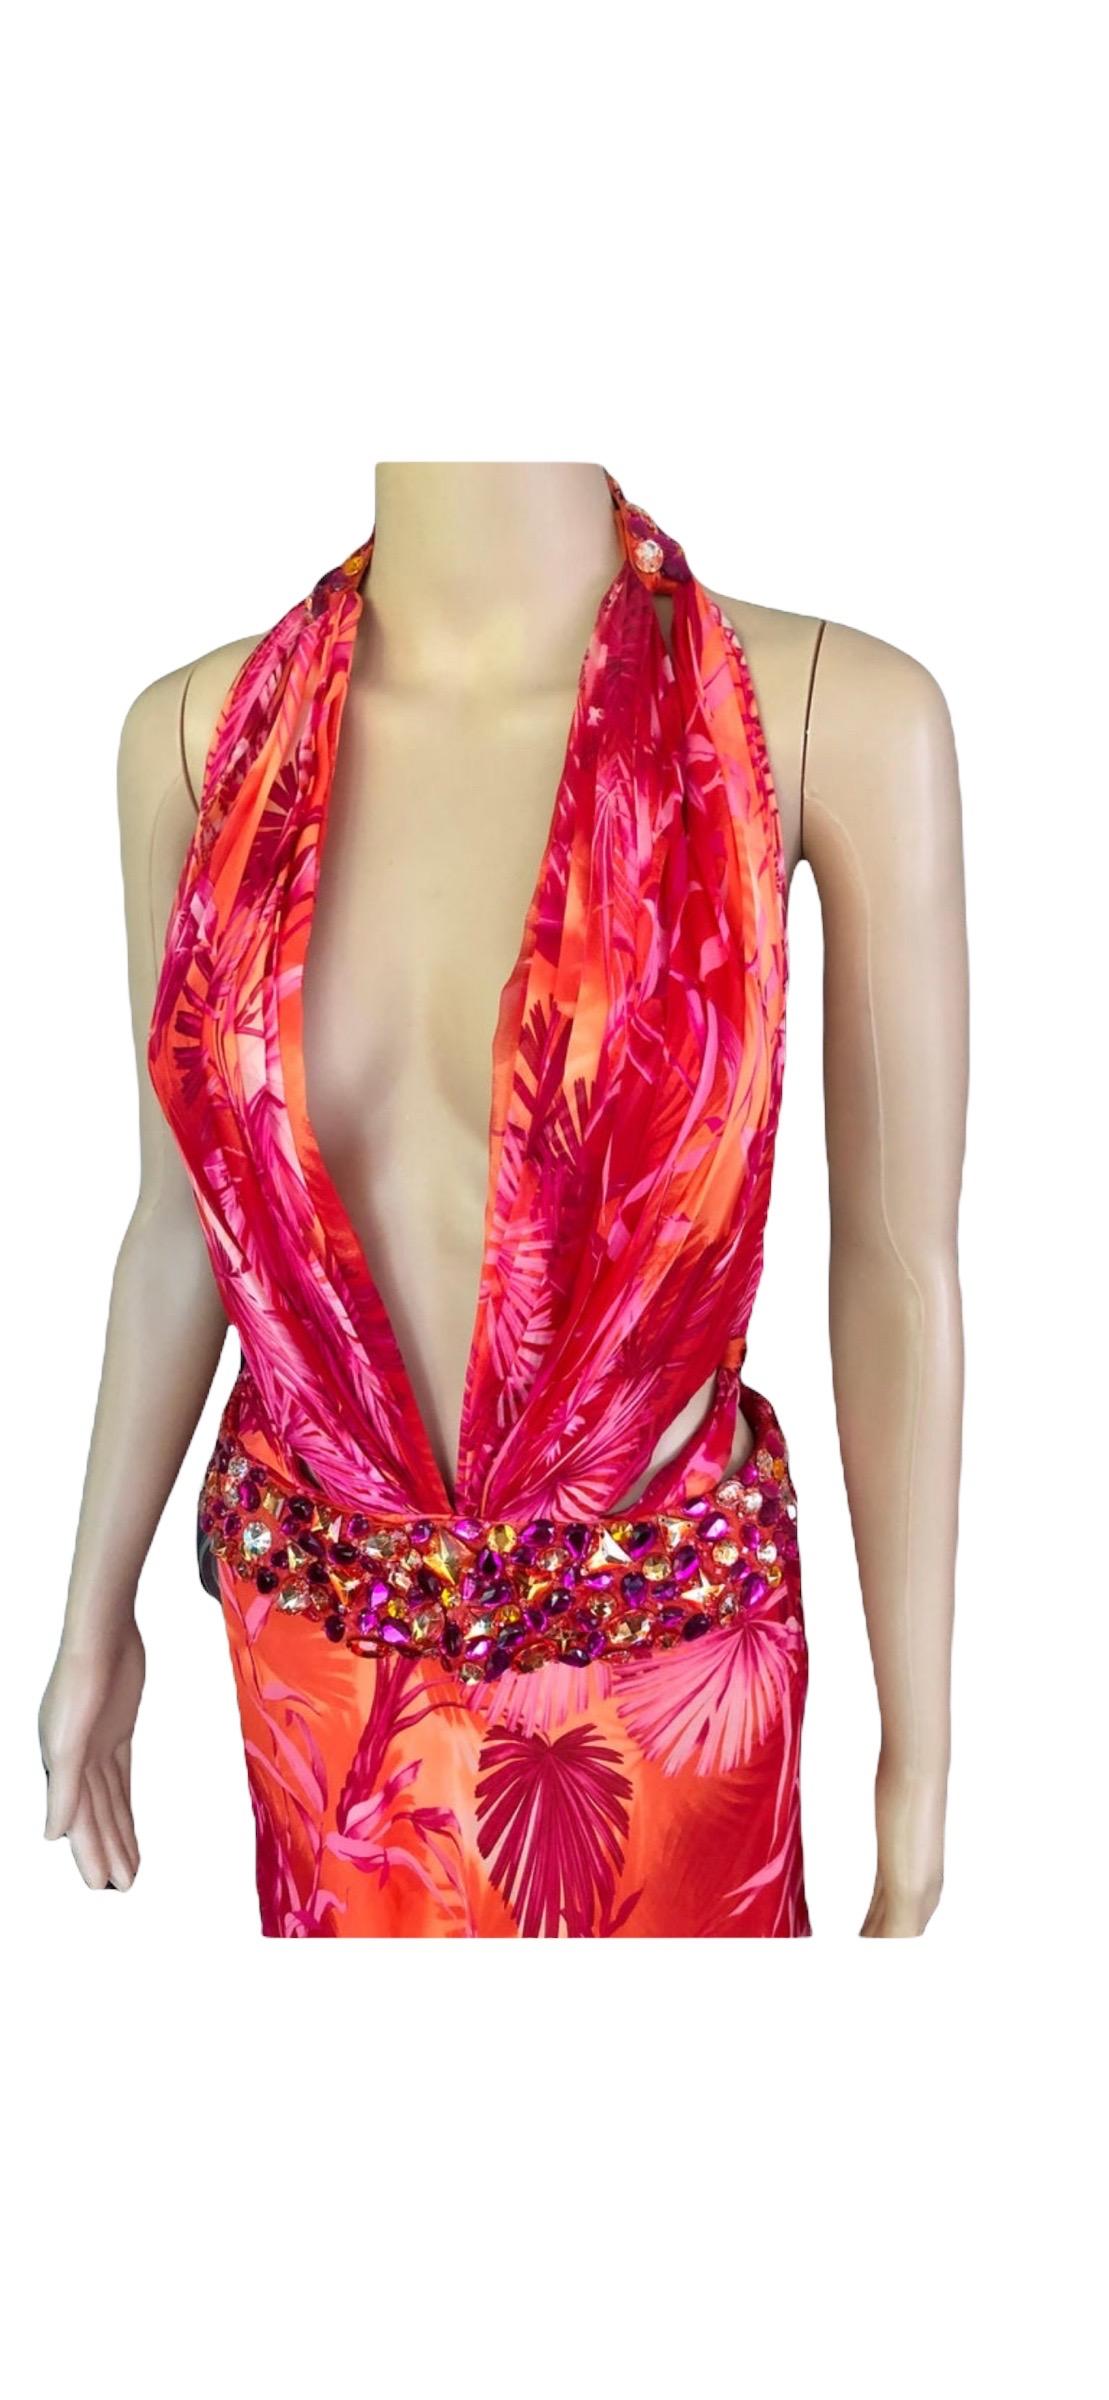 Gianni Versace S/S 2000 Runway Embellished Jungle Print Evening Dress Gown For Sale 3